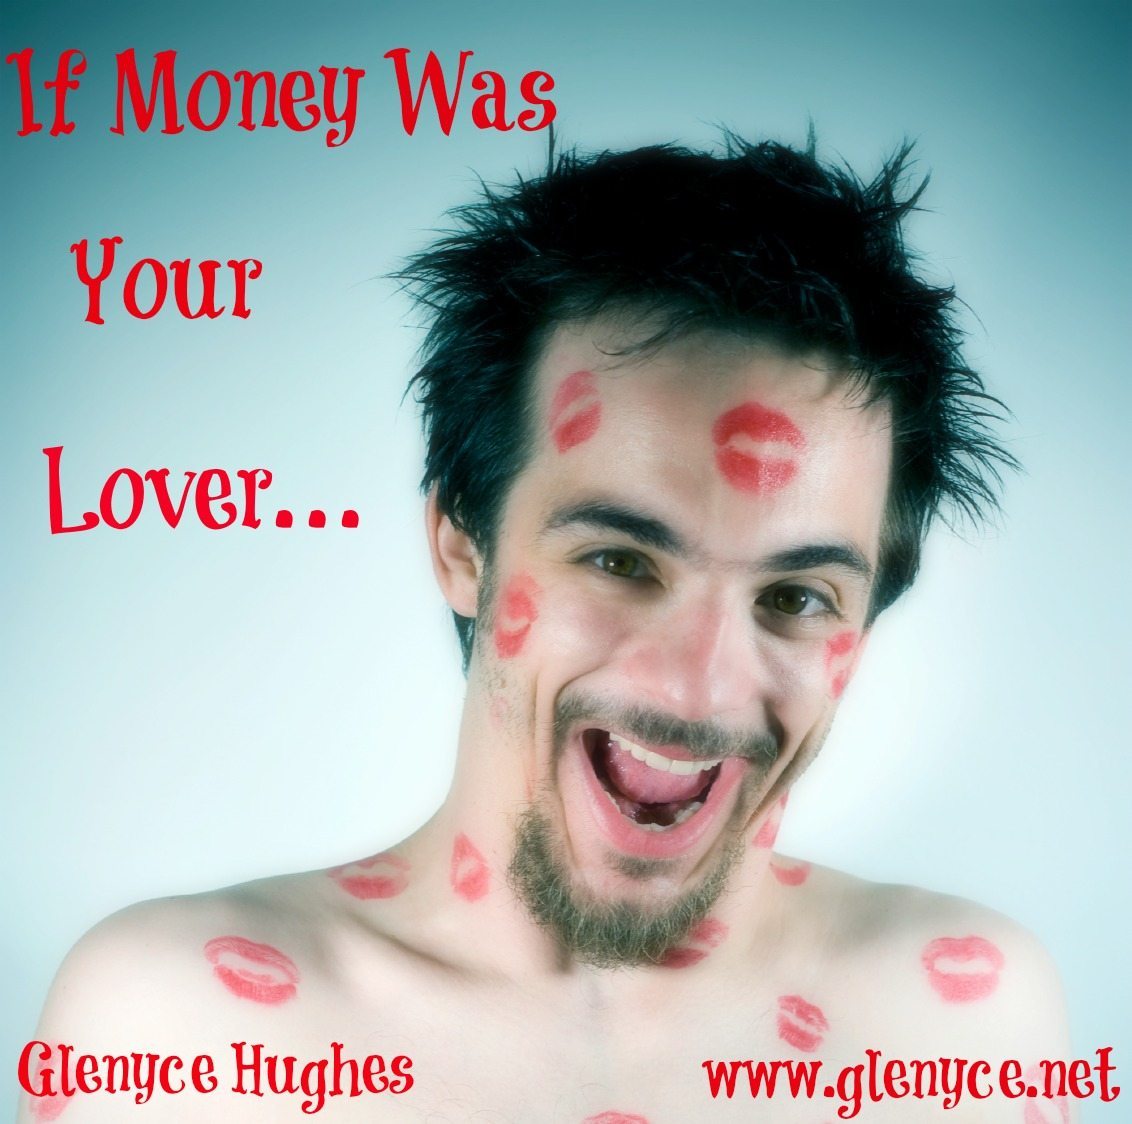 If Money was Your Lover